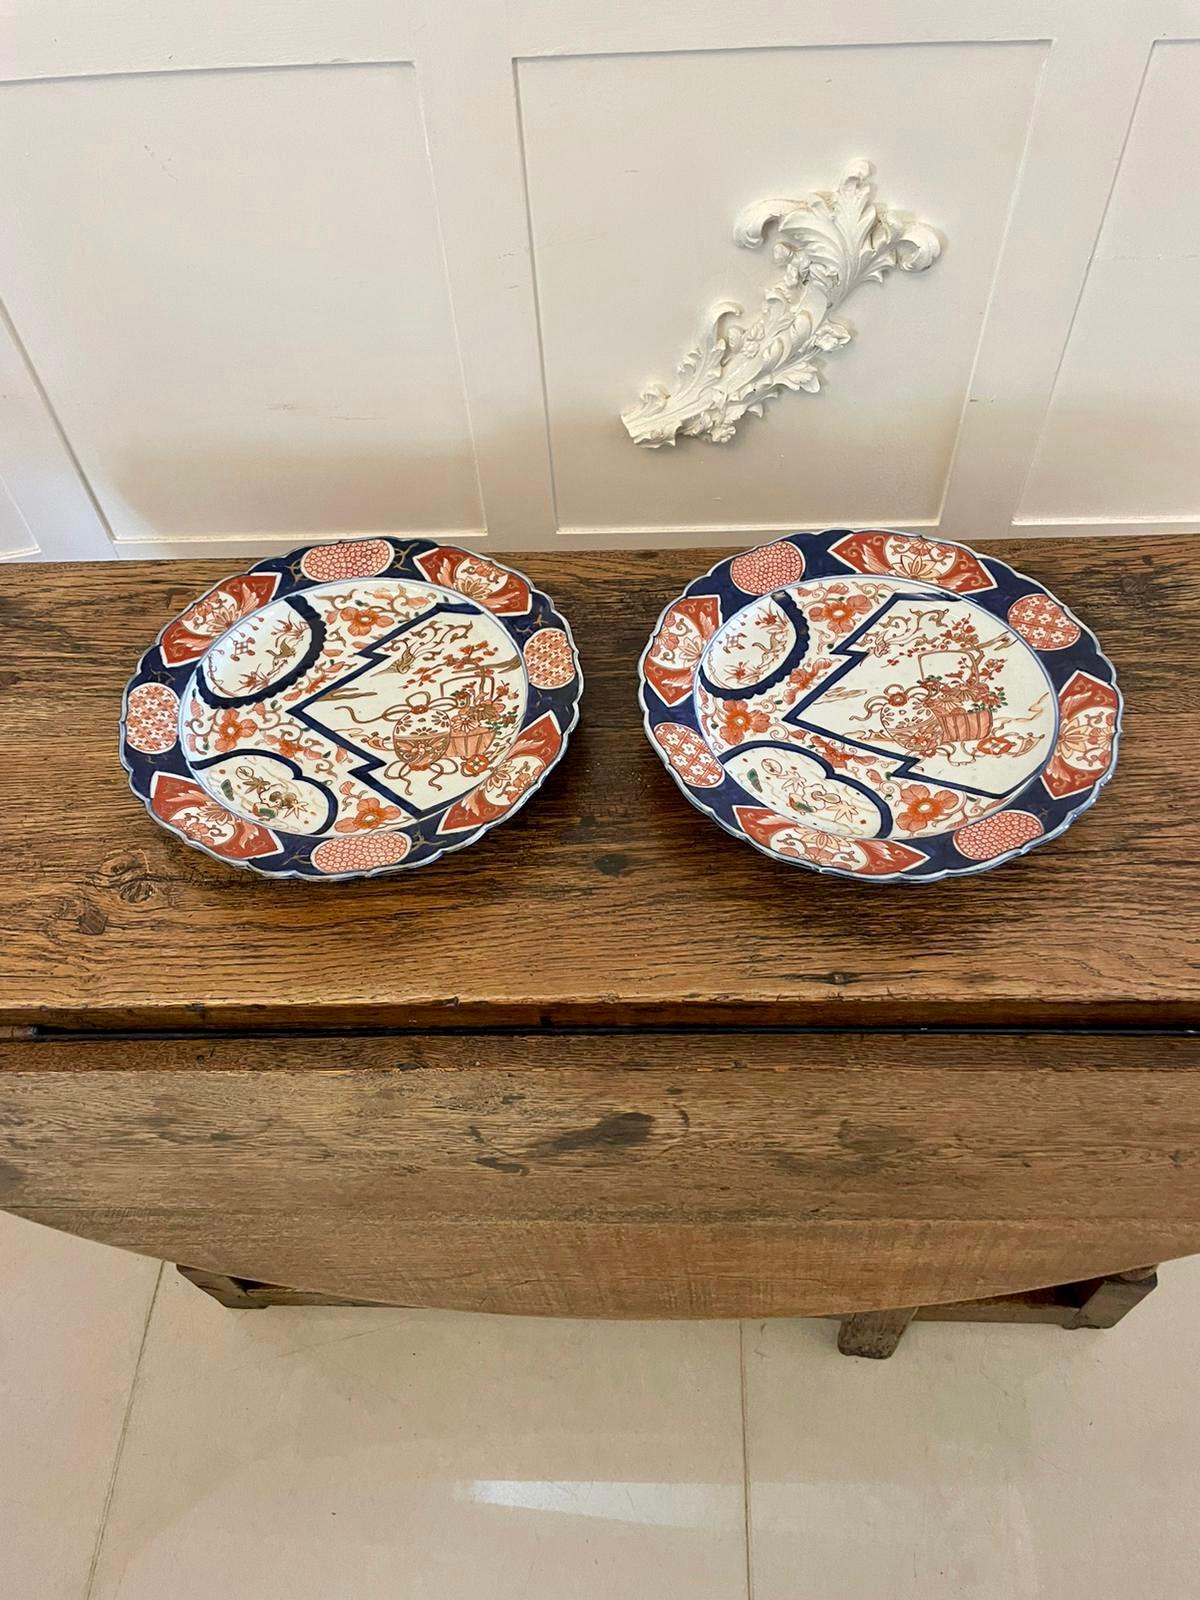 Pair of antique Japanese quality hand painted Imari plates wonderfully hand painted in blue, green white and gold colours


A lovely pair in perfect original condition


Dimensions:
Height 4 cm (1.57 in)
Width 27.5 cm (10.82 in)
Depth 27.5 cm (10.82